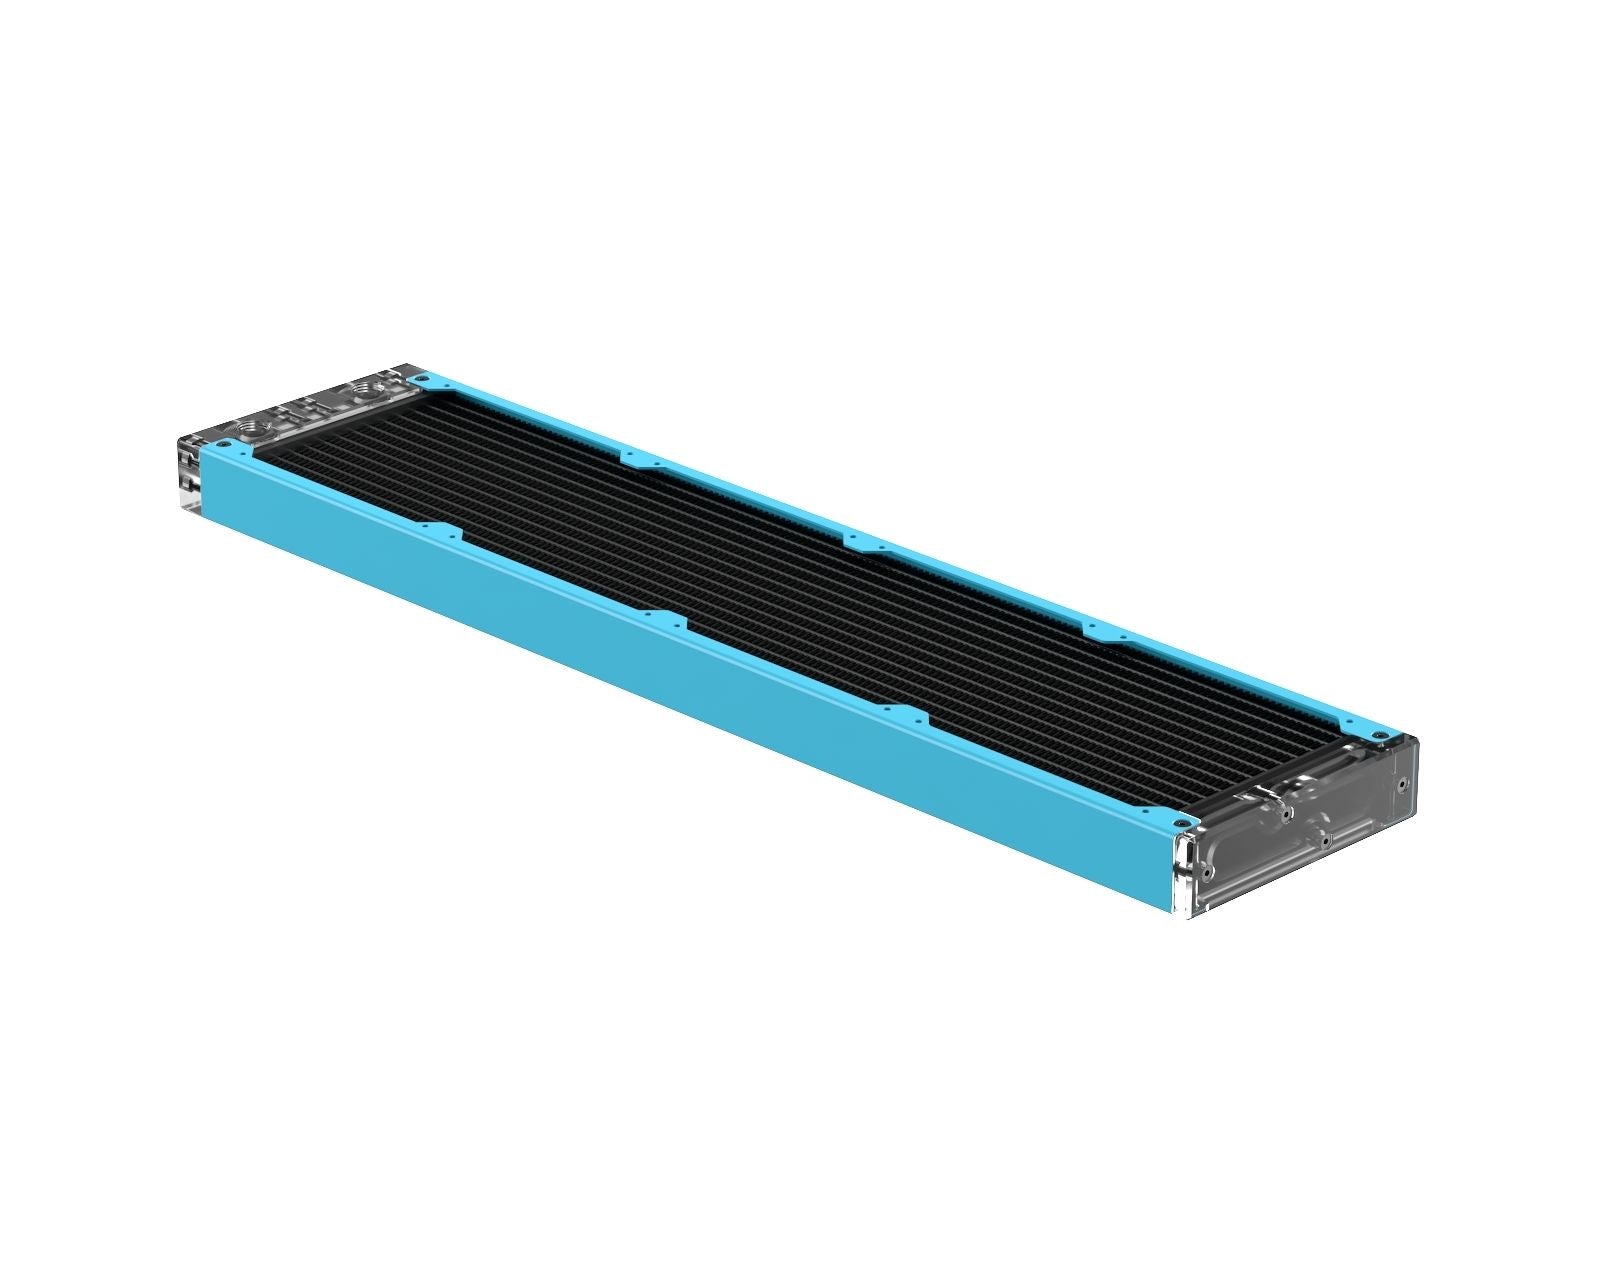 PrimoChill 480SL (30mm) EXIMO Modular Radiator, Clear Acrylic, 4x120mm, Quad Fan (R-SL-A48) Available in 20+ Colors, Assembled in USA and Custom Watercooling Loop Ready - Sky Blue